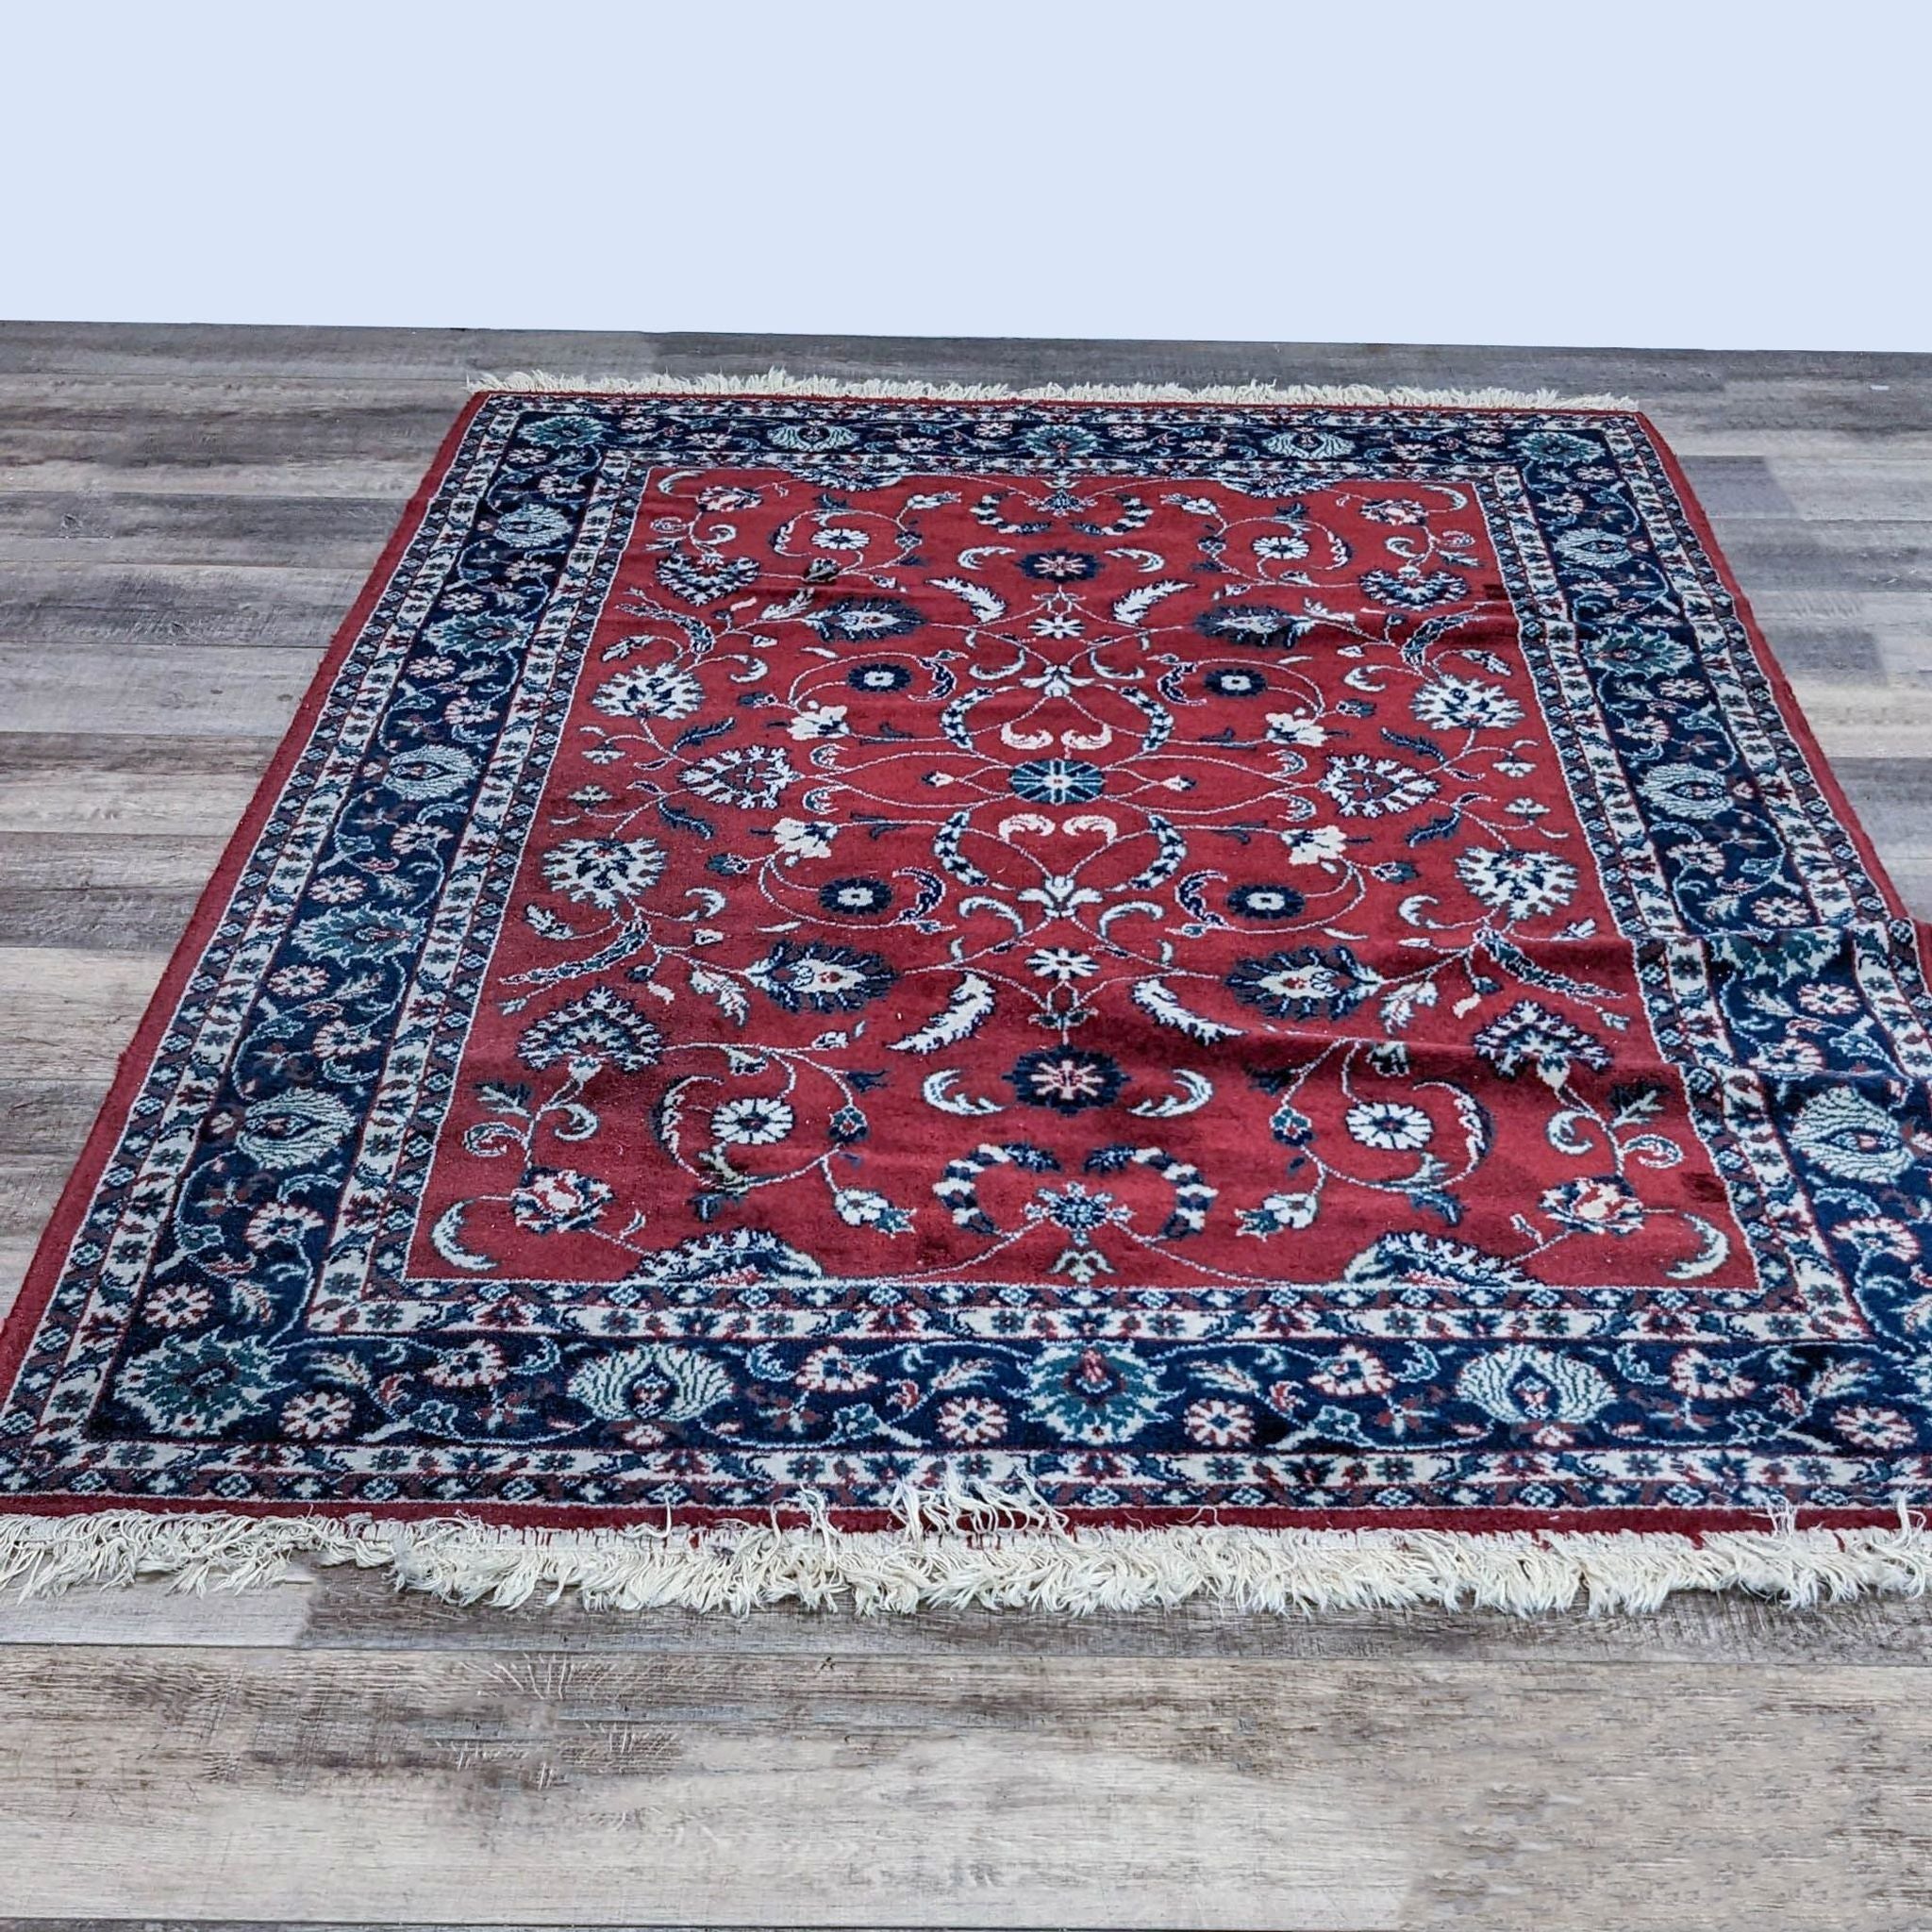 Reperch-branded 5'7"x8'4" oriental wool rug with red core, intricate blue and white patterns, and fringed edges.